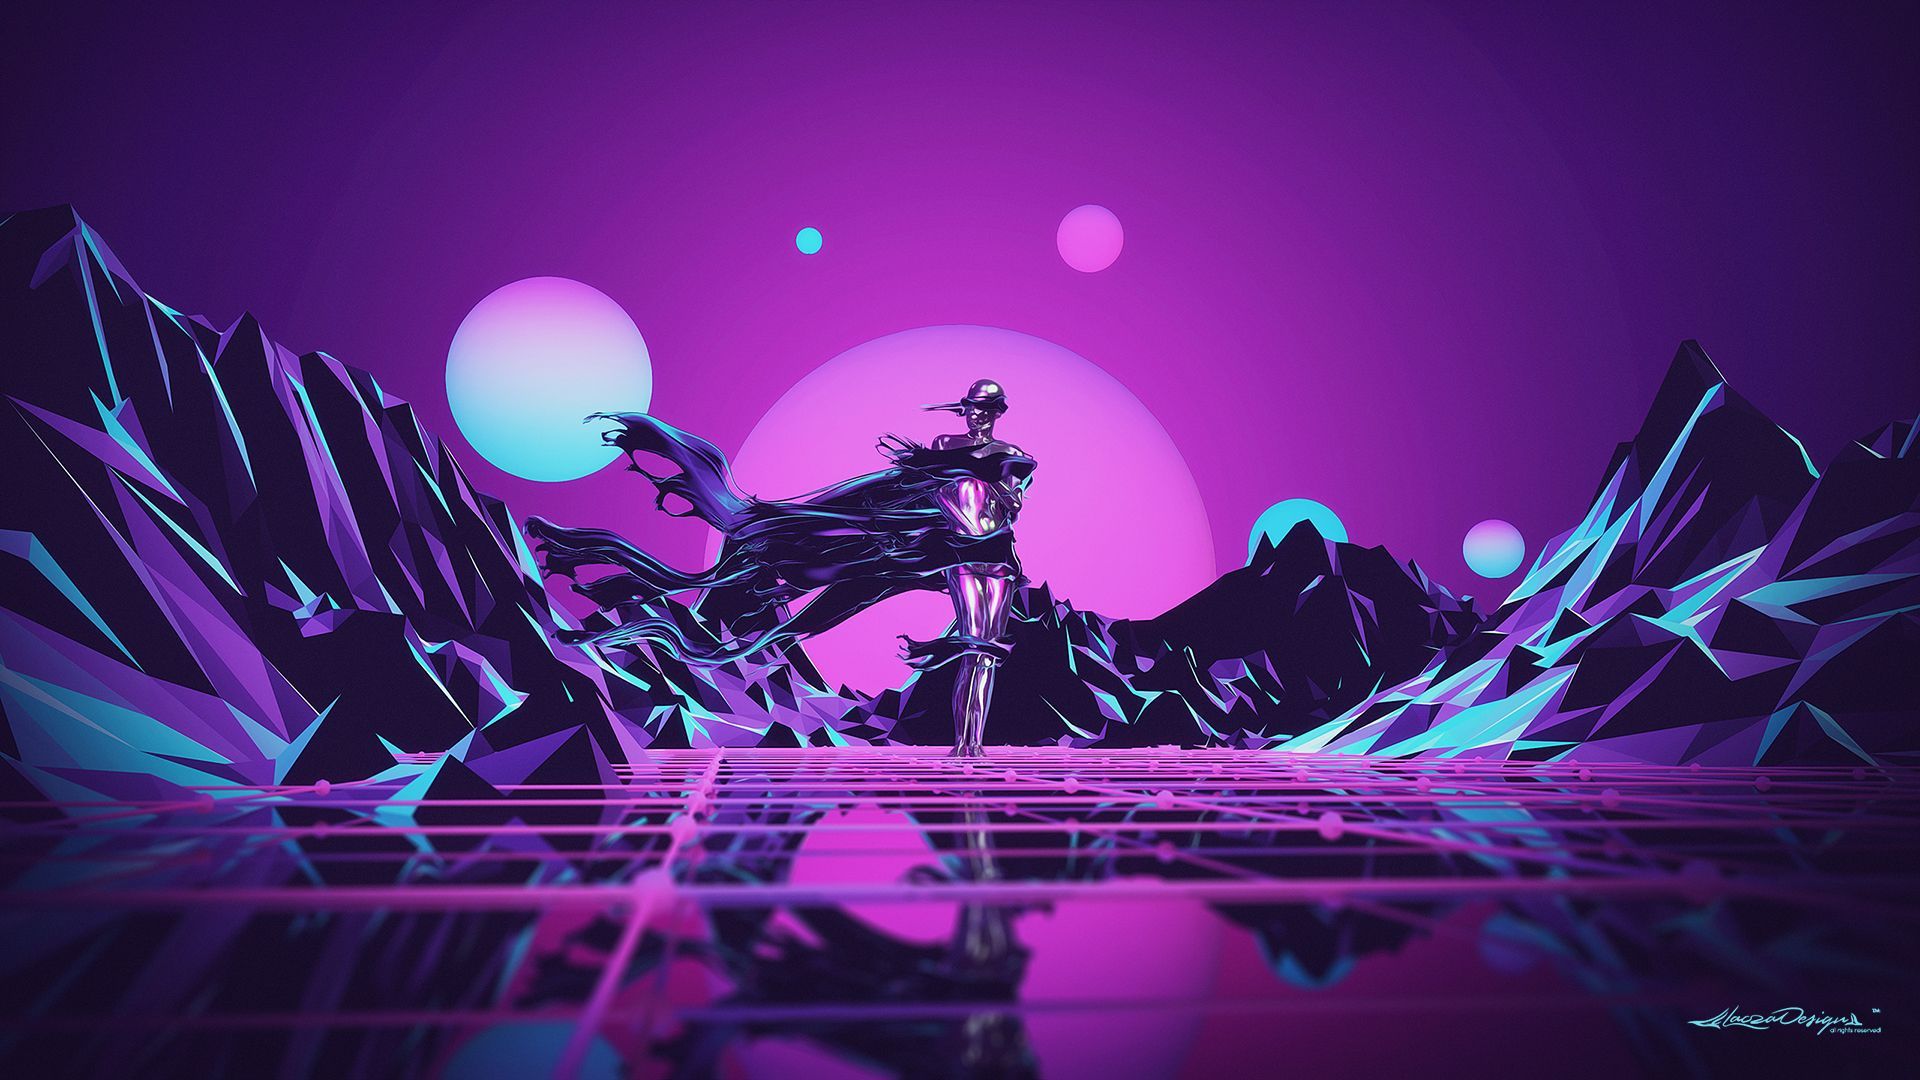 General 1920x1080 abstract Lacza low poly Retro style. Creative